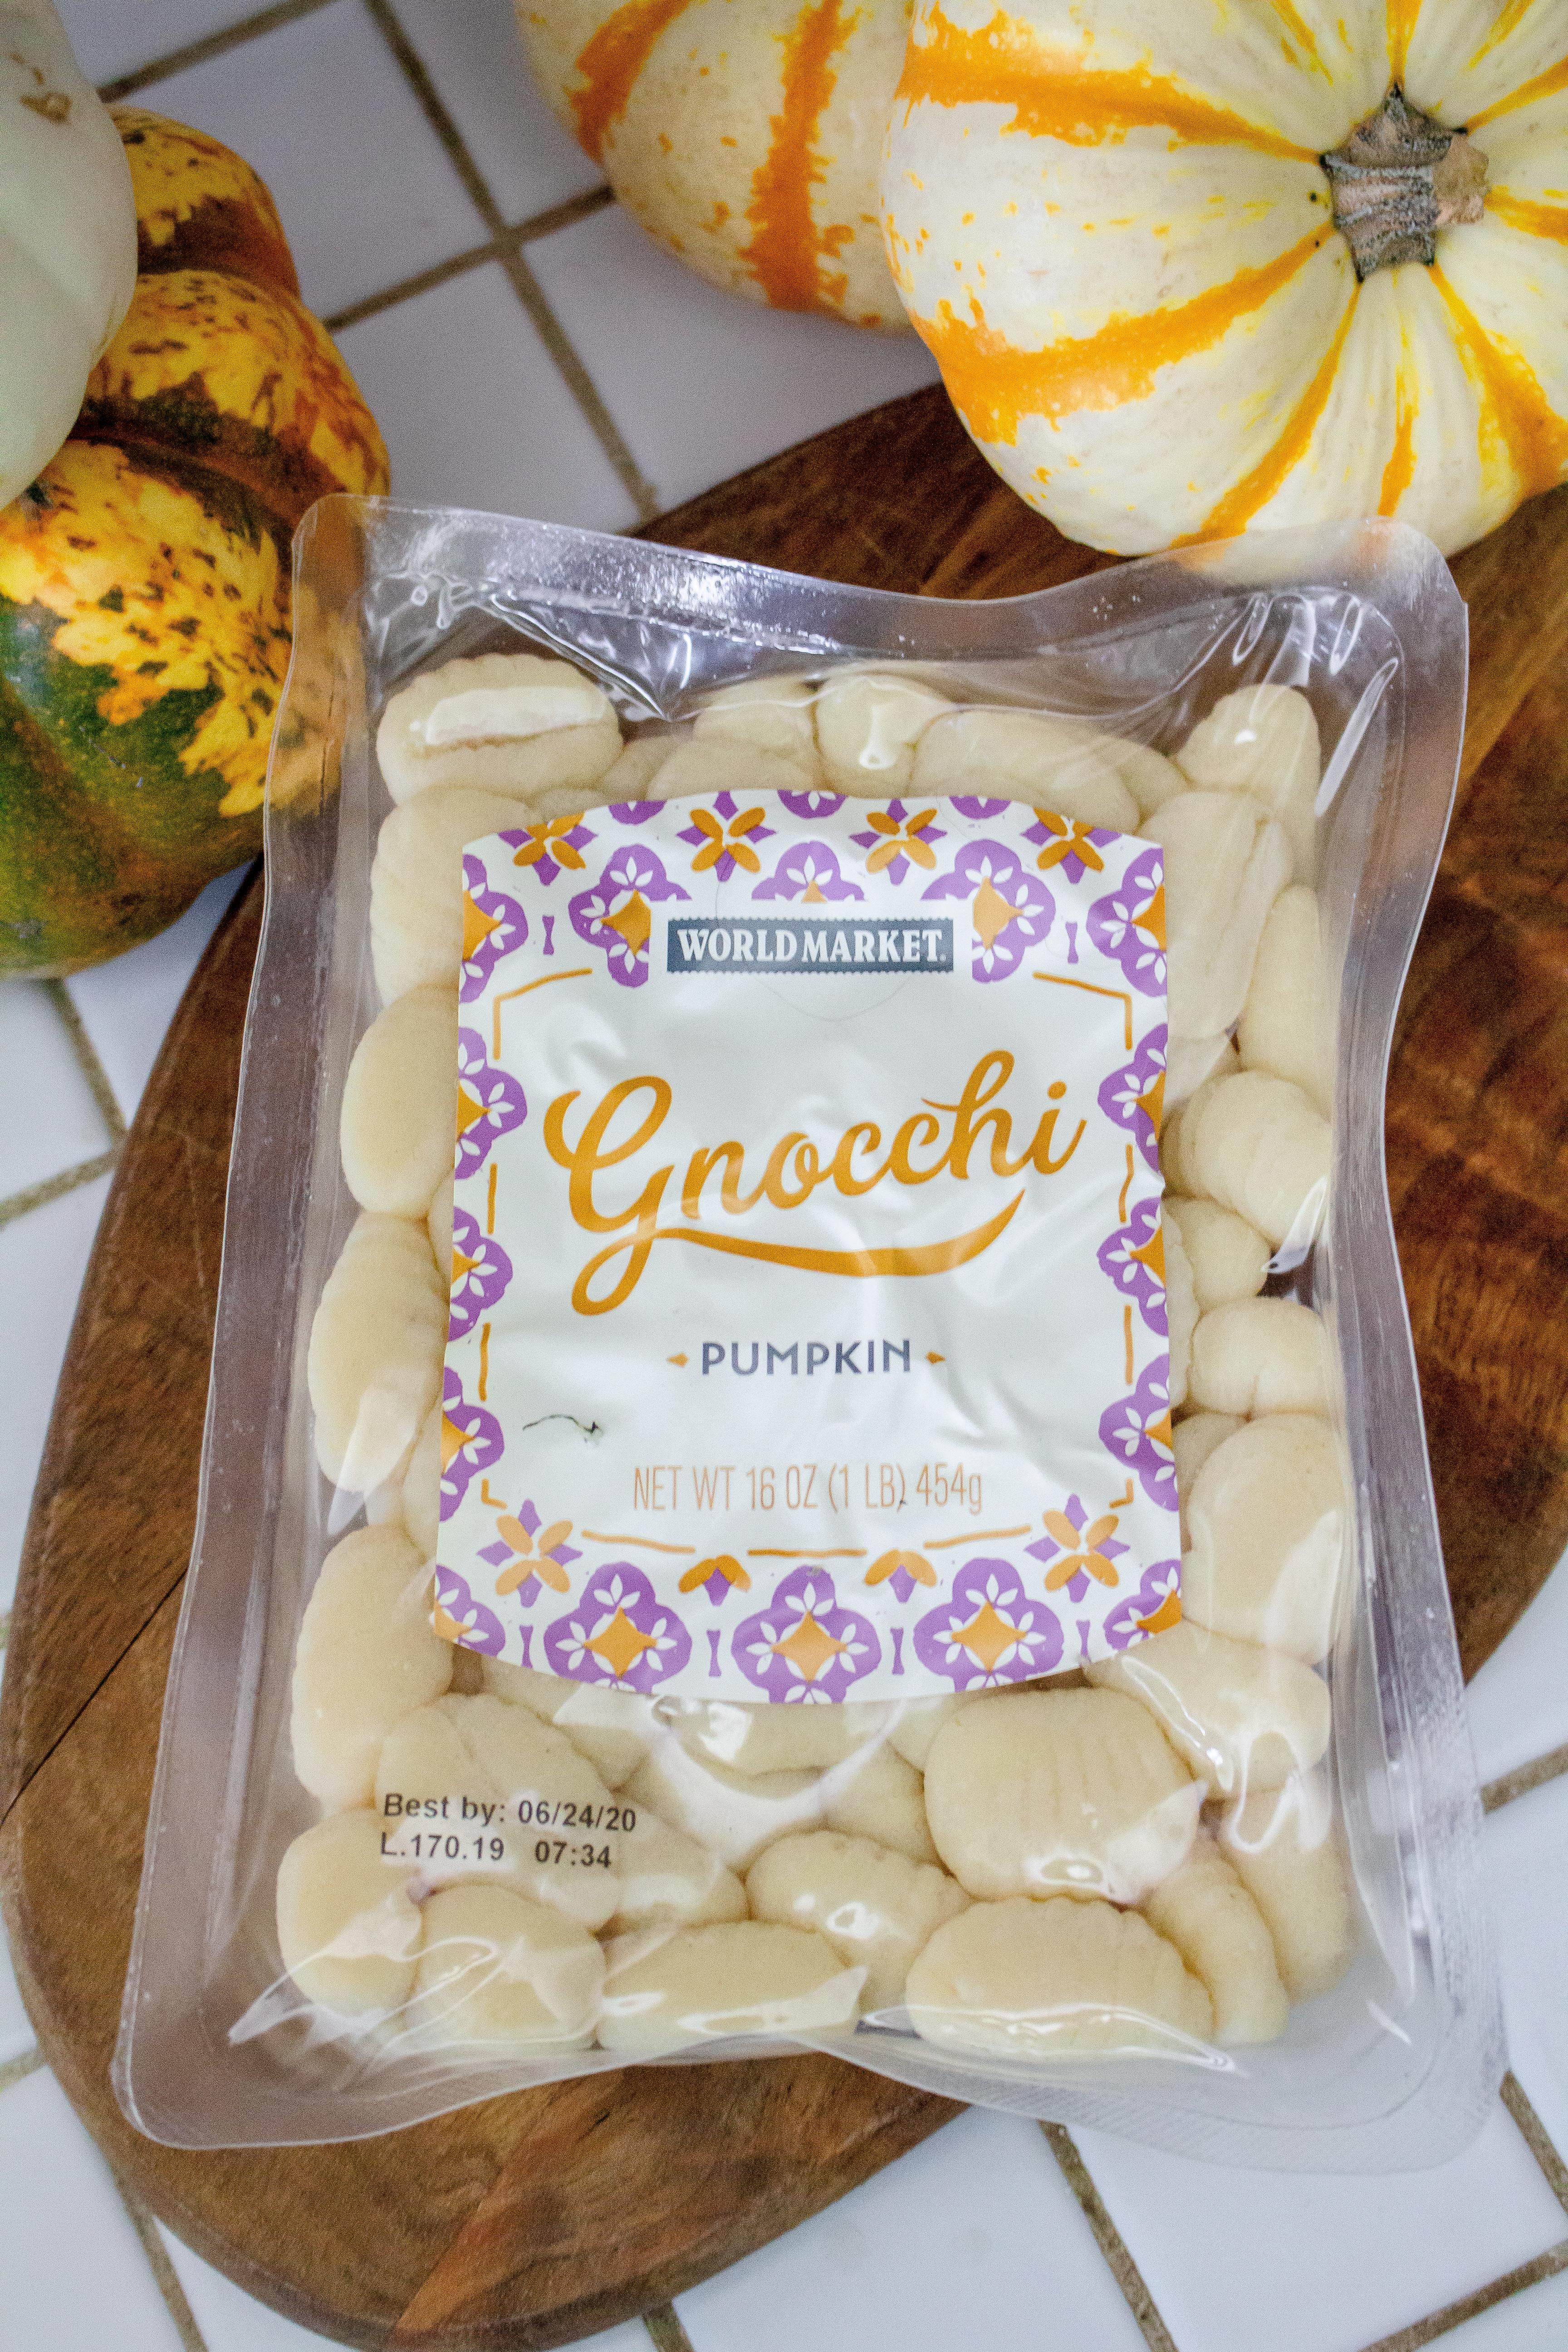 The best pumpkin gnocchi soup recipe that will change your life